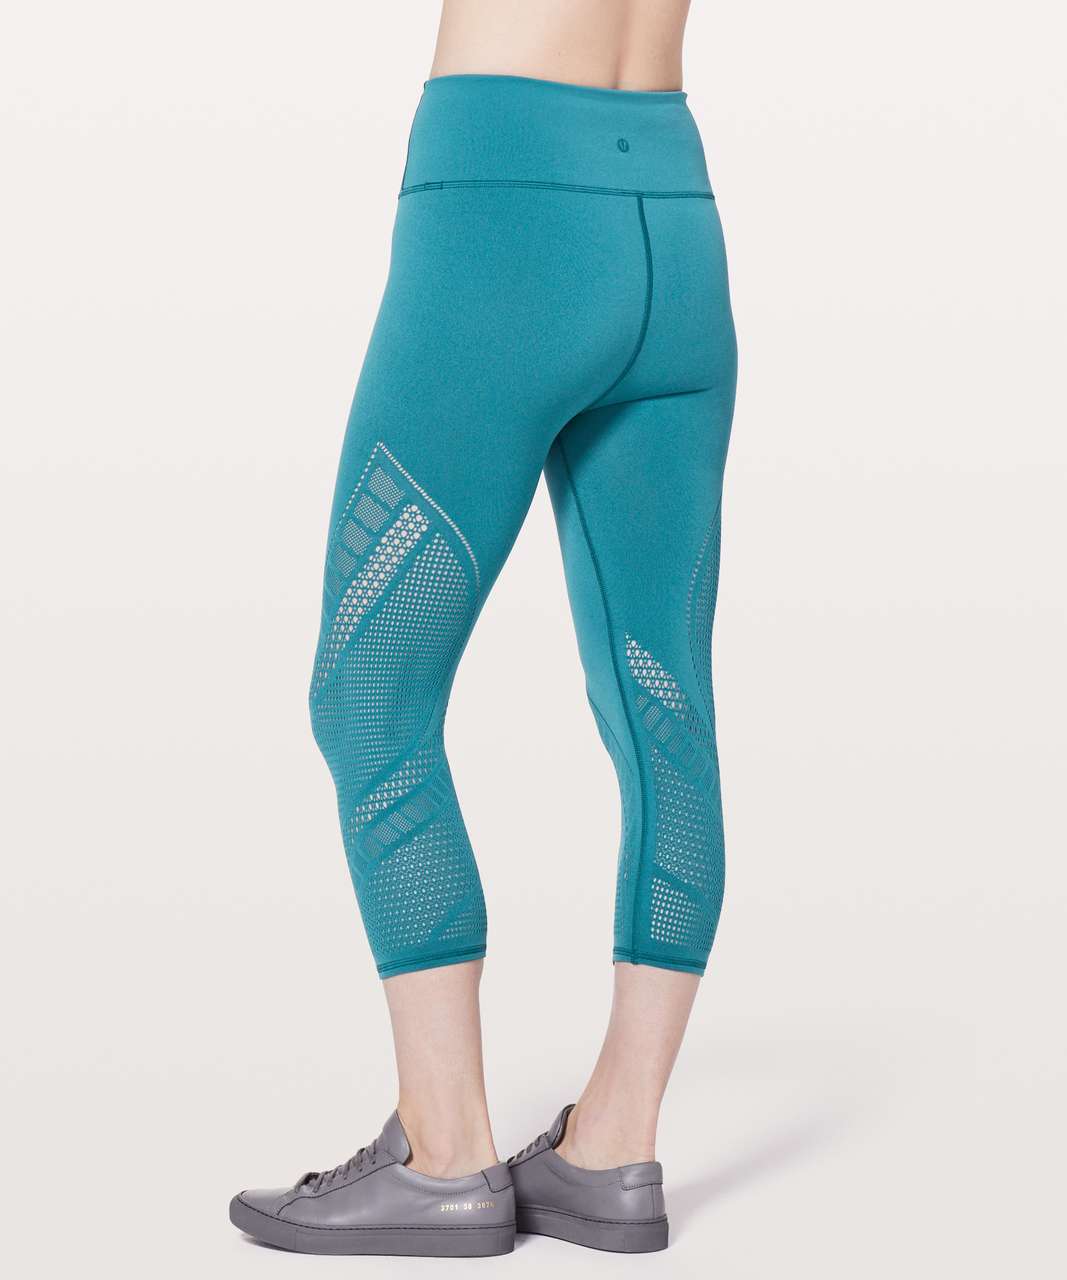 NWT Lululemon Reveal Tight Interconnect *25.5 Gravity | SIZE 4